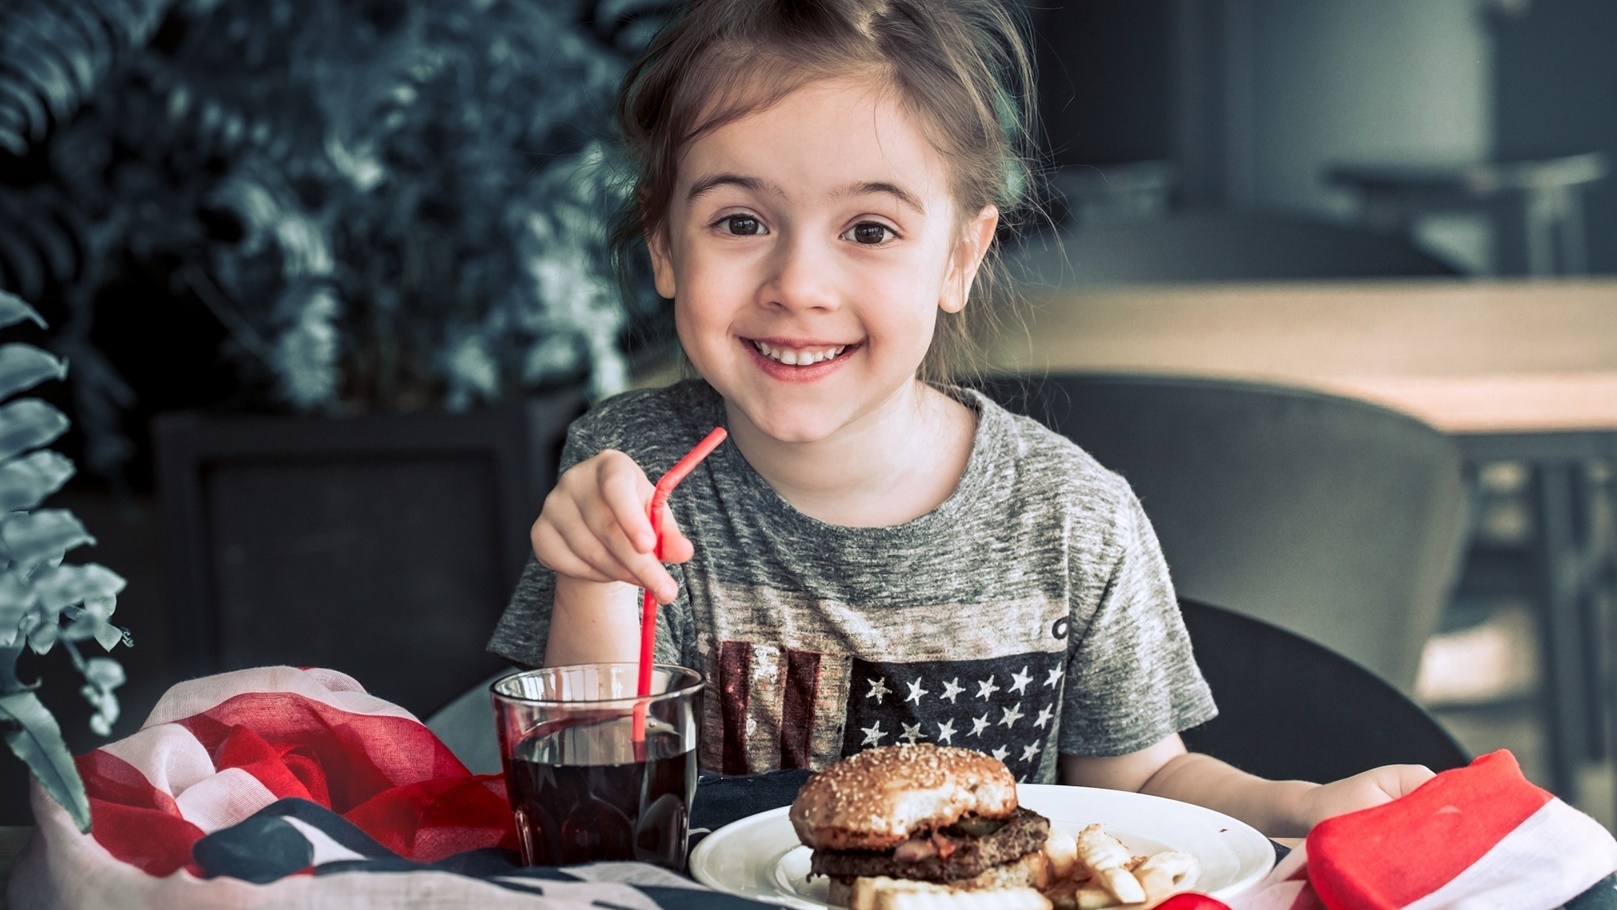 little-girl-in-cafe-with-burger-2021-08-31-10-33-01-utc